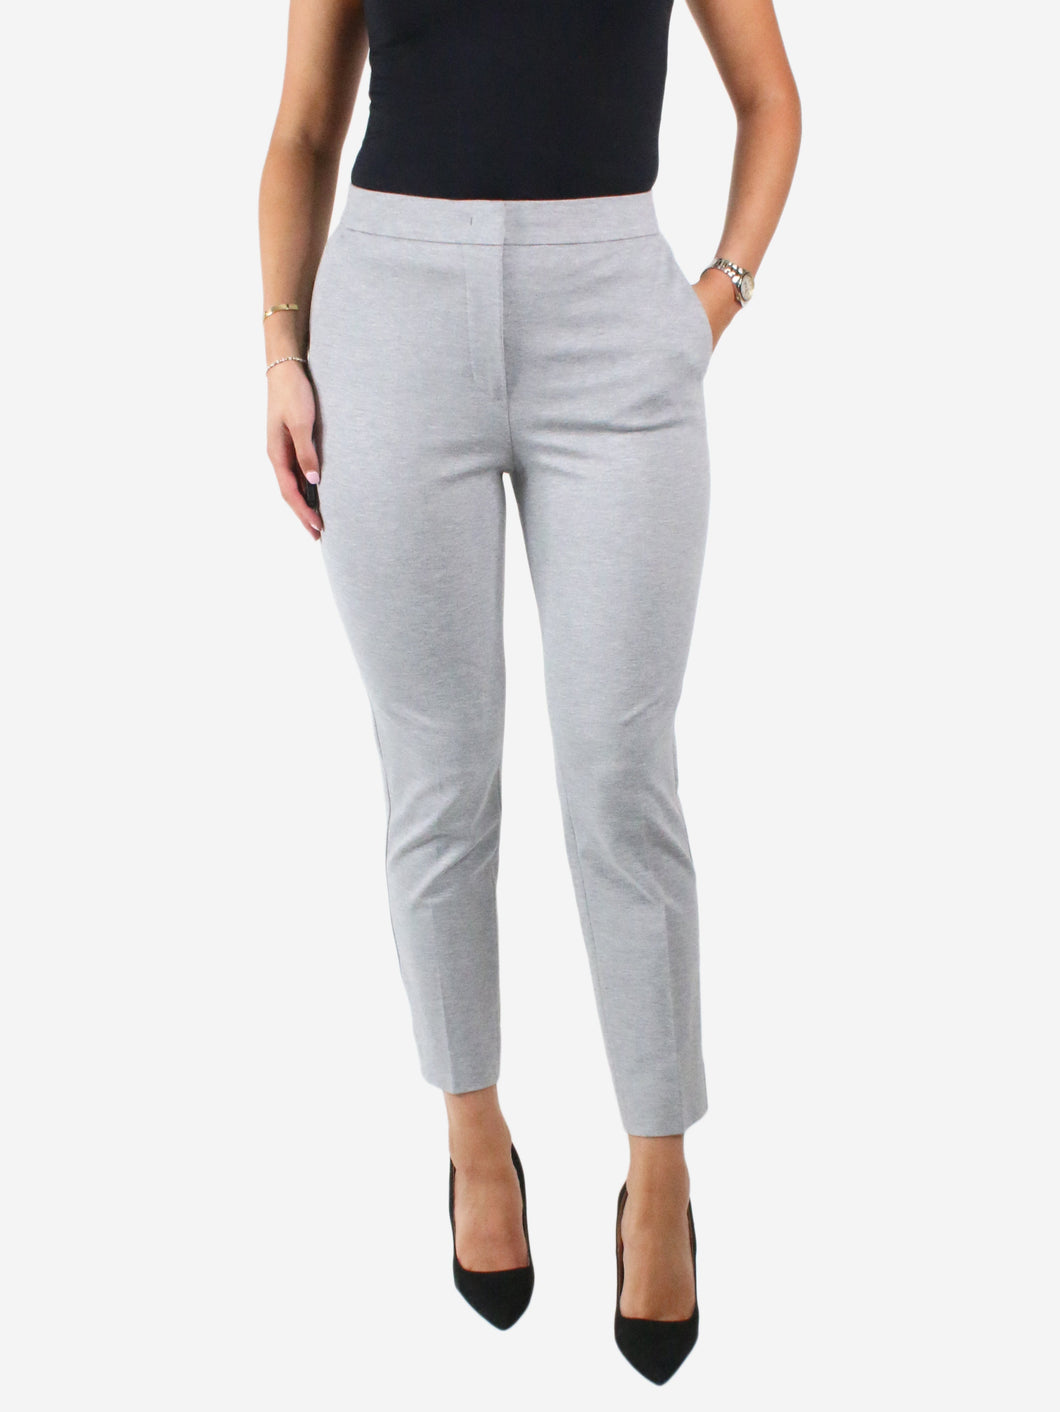 Grey tailored trousers - size UK 10 Trousers Max Mara 